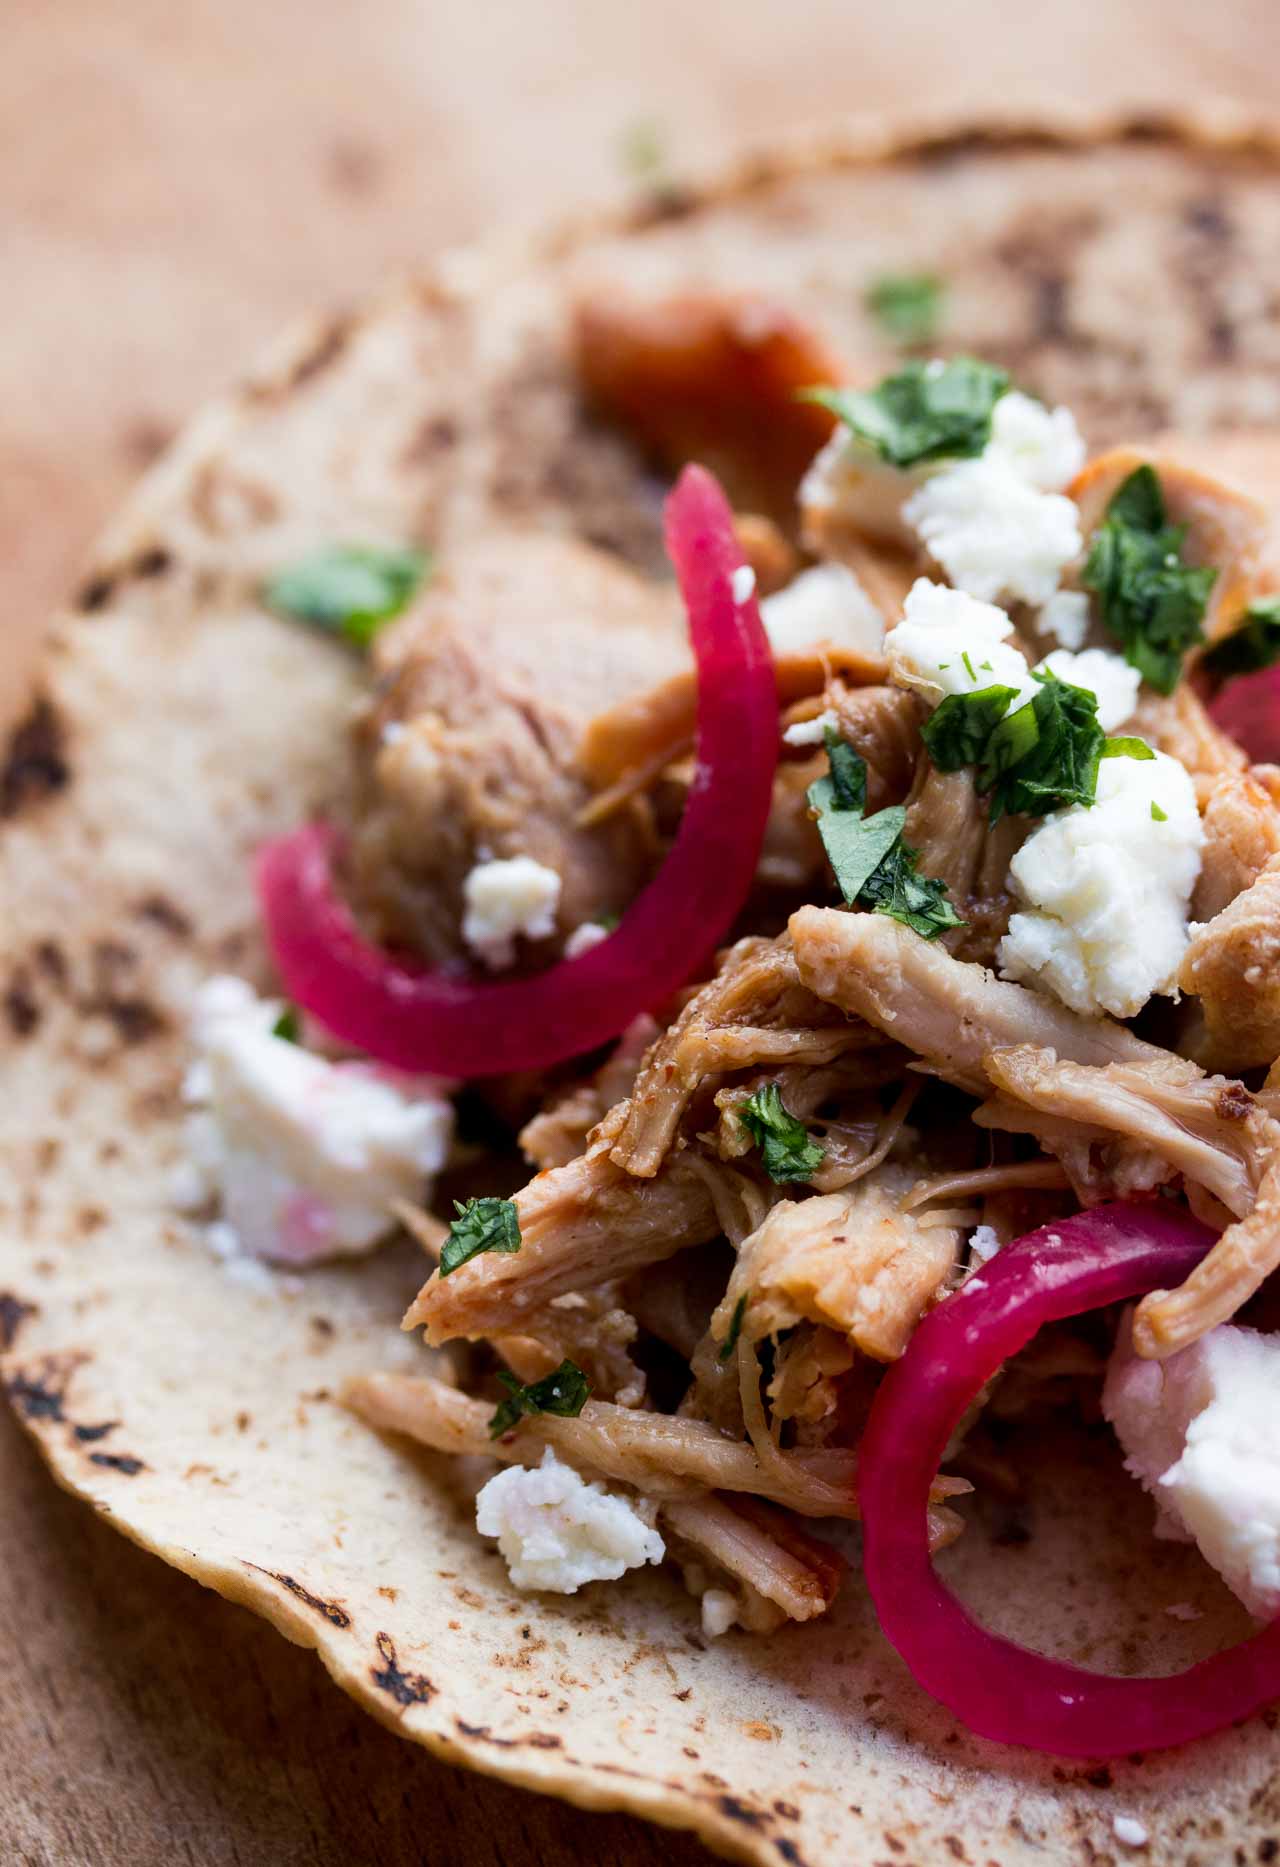 A recipe for Mexican carnitas, pulled pork, perfect for tacos or a Mexican food fiesta!